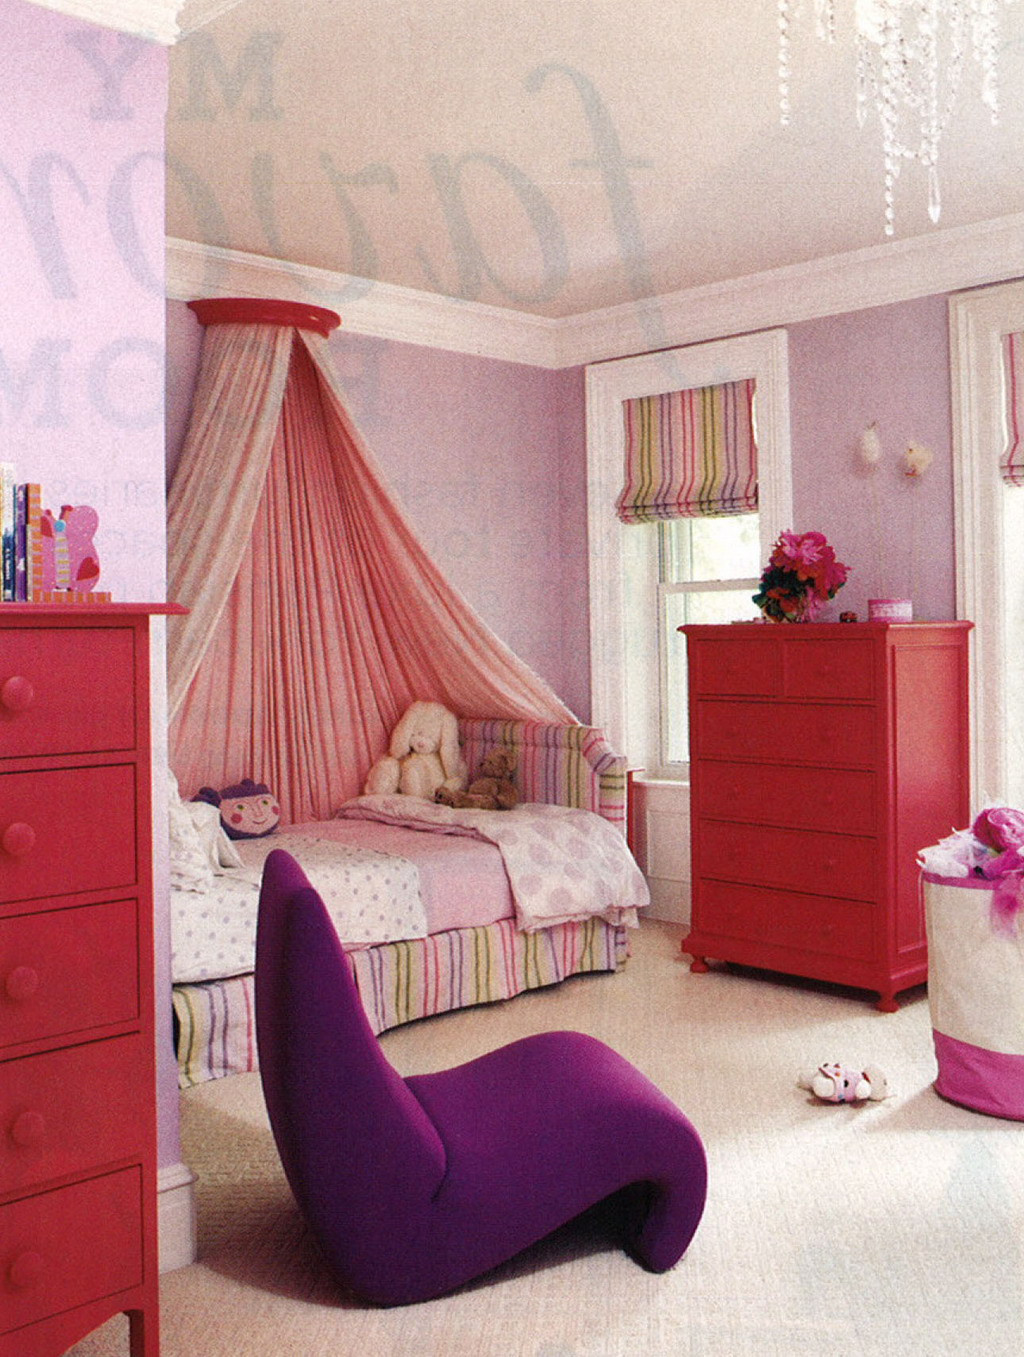 Chair For Girls Bedroom
 Girls Chairs for Bedroom Decor IdeasDecor Ideas